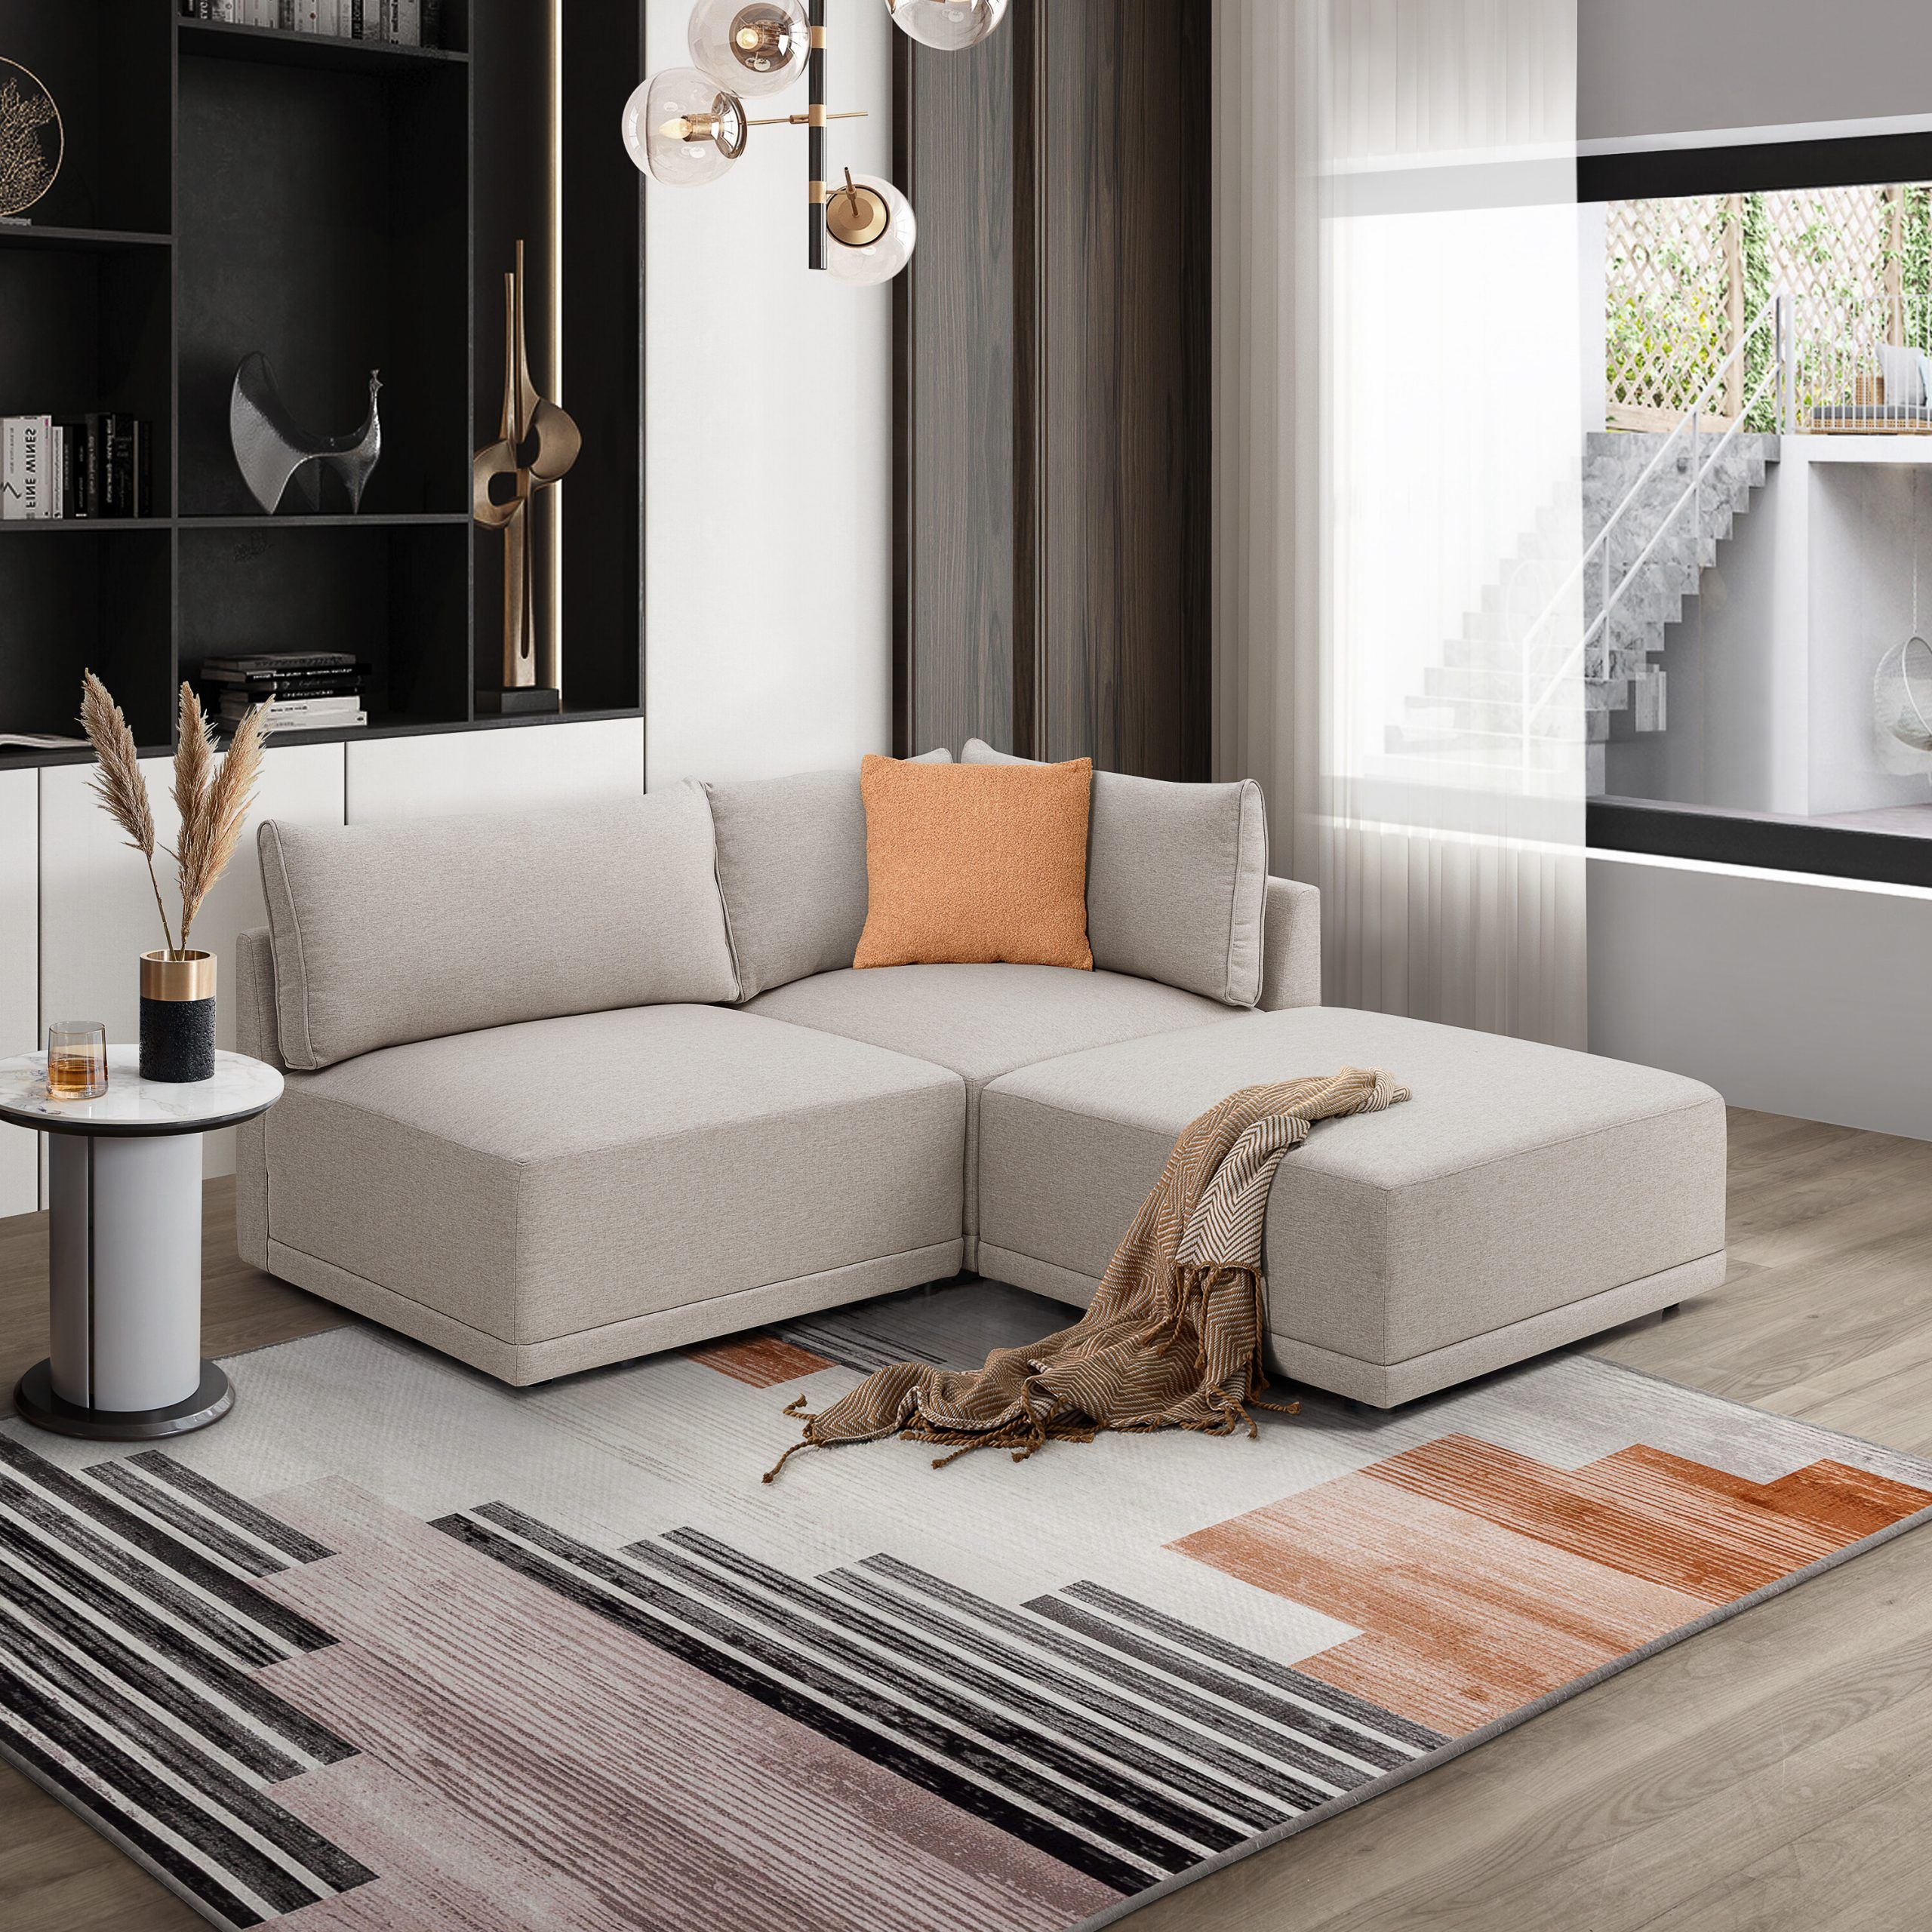 Launce Modular Sofa (Beige) – All Sofas – Sofas – Living Room Furniture |  Furniture & Home Décor | Fortytwo Regarding Small L Shaped Sectional Sofas In Beige (View 11 of 15)